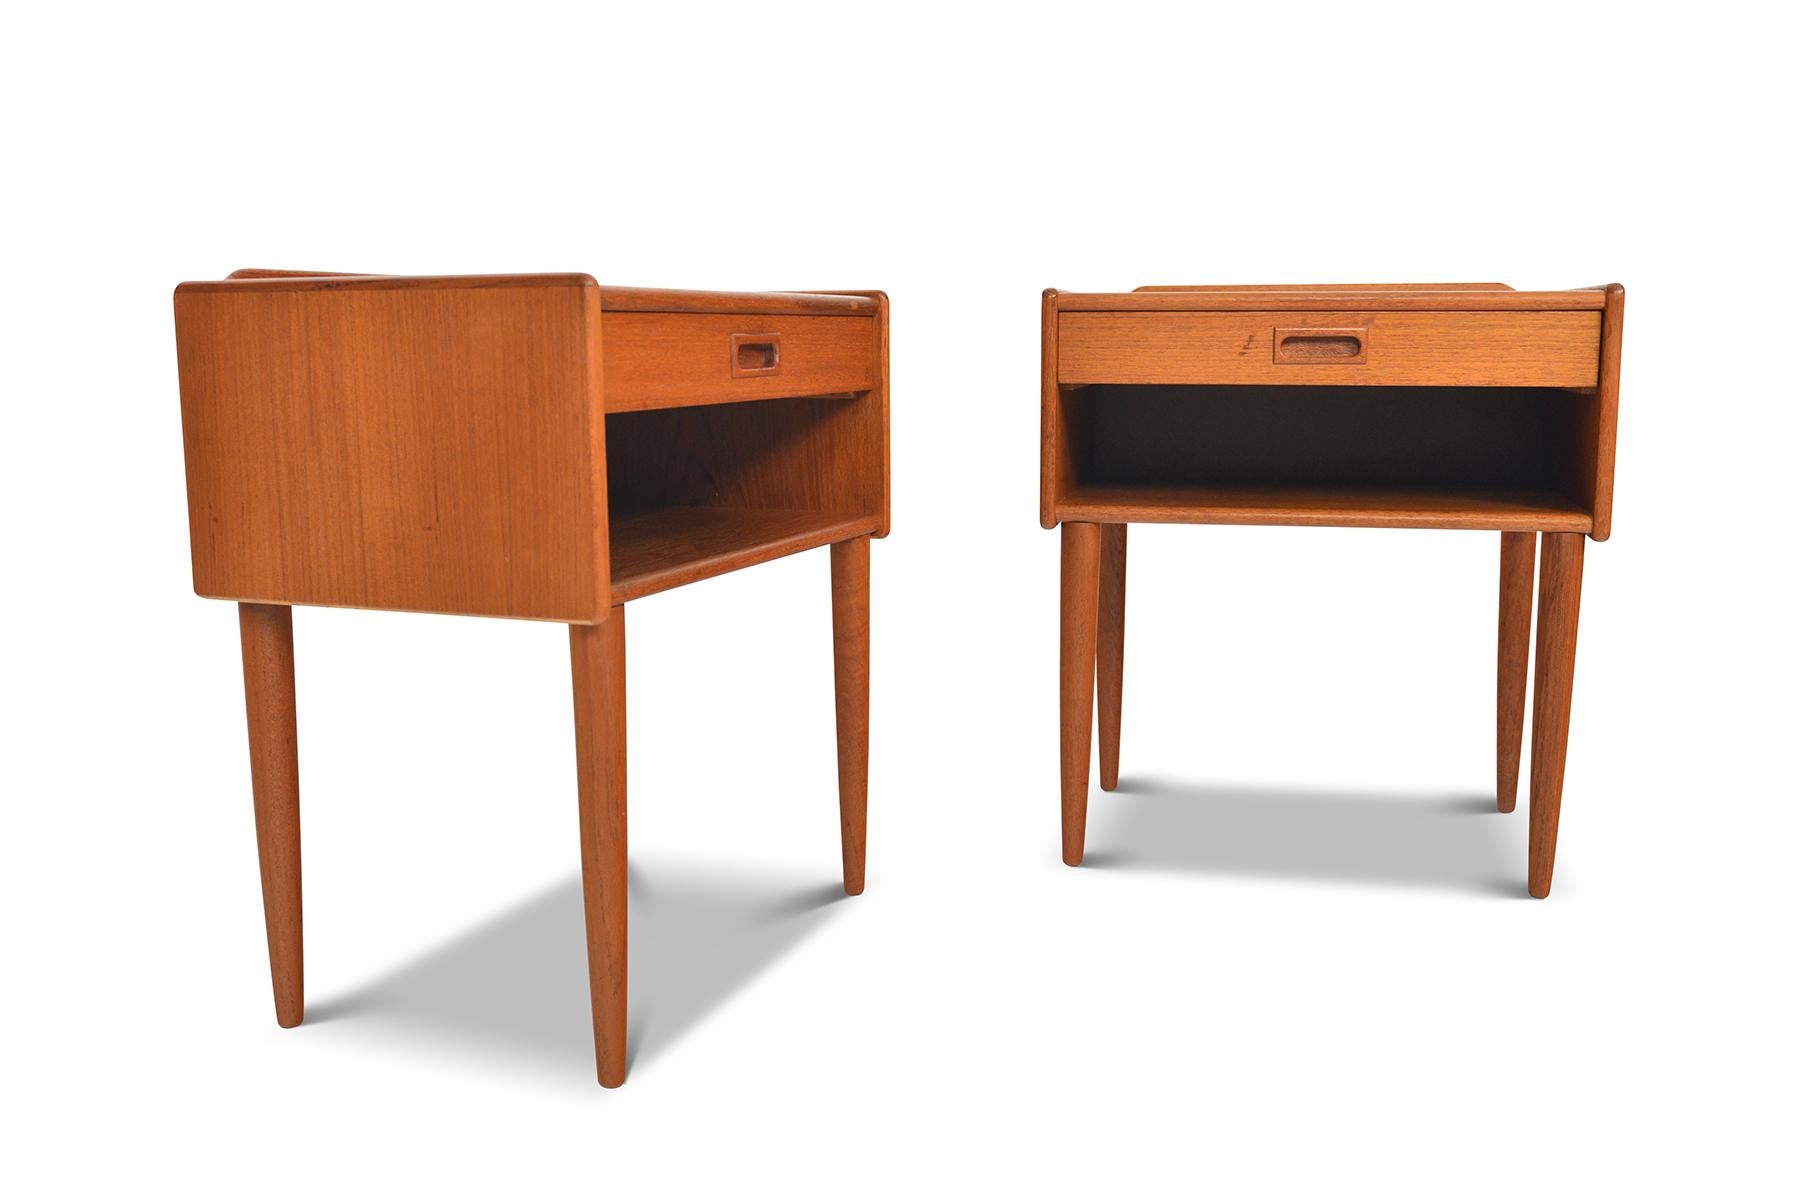 This handsome pair of Danish modern midcentury nightstands blend form and function seamlessly. A single pullout drawer provides storage for smaller items with a roomy open cubby beneath. In excellent original condition with typical wear for their